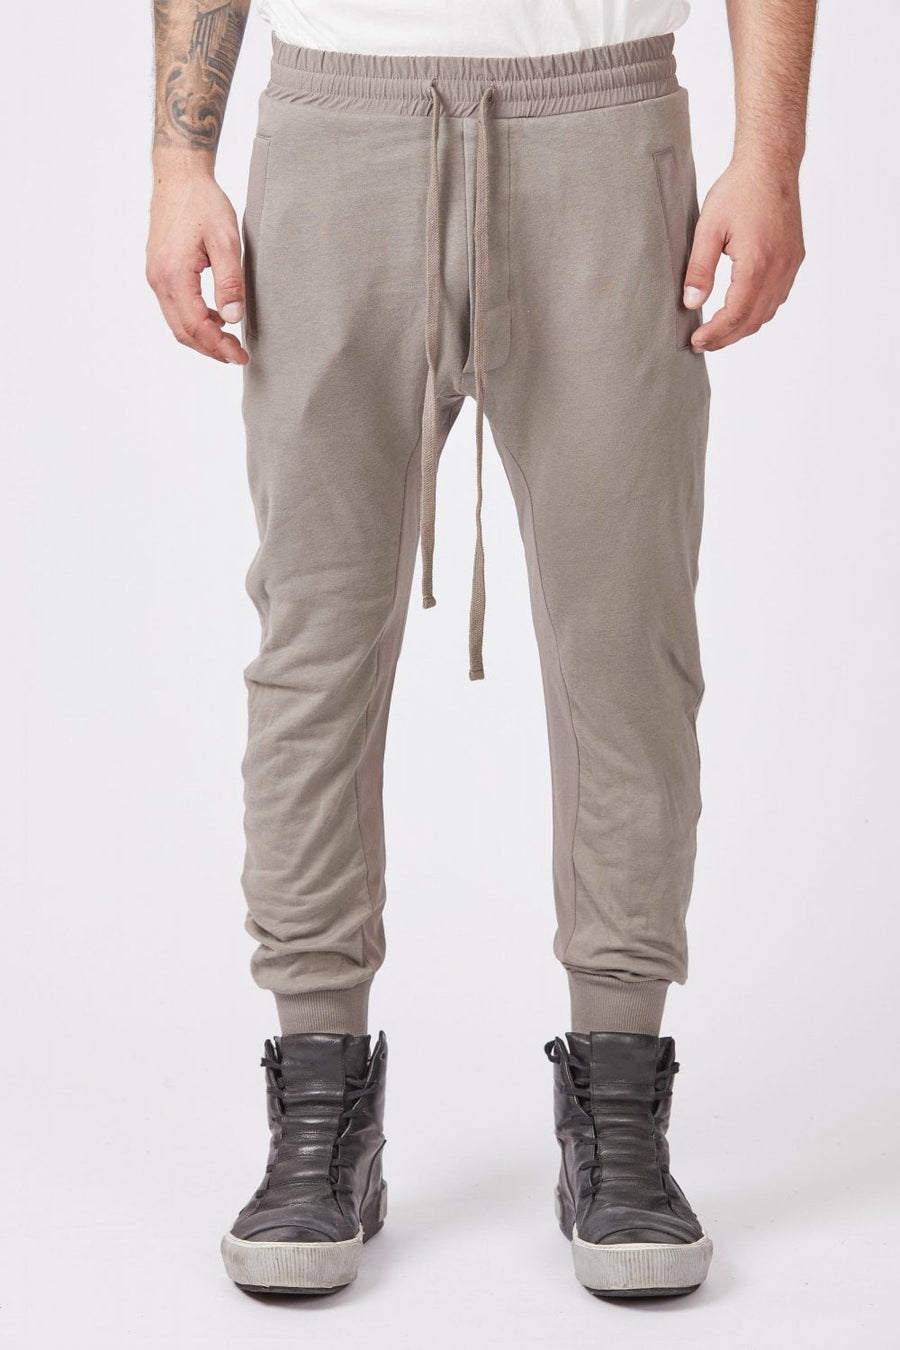 Buy the Thom Krom M ST 317 Sweatpants in Ash at Intro. Spend £50 for free UK delivery. Official stockists. We ship worldwide.